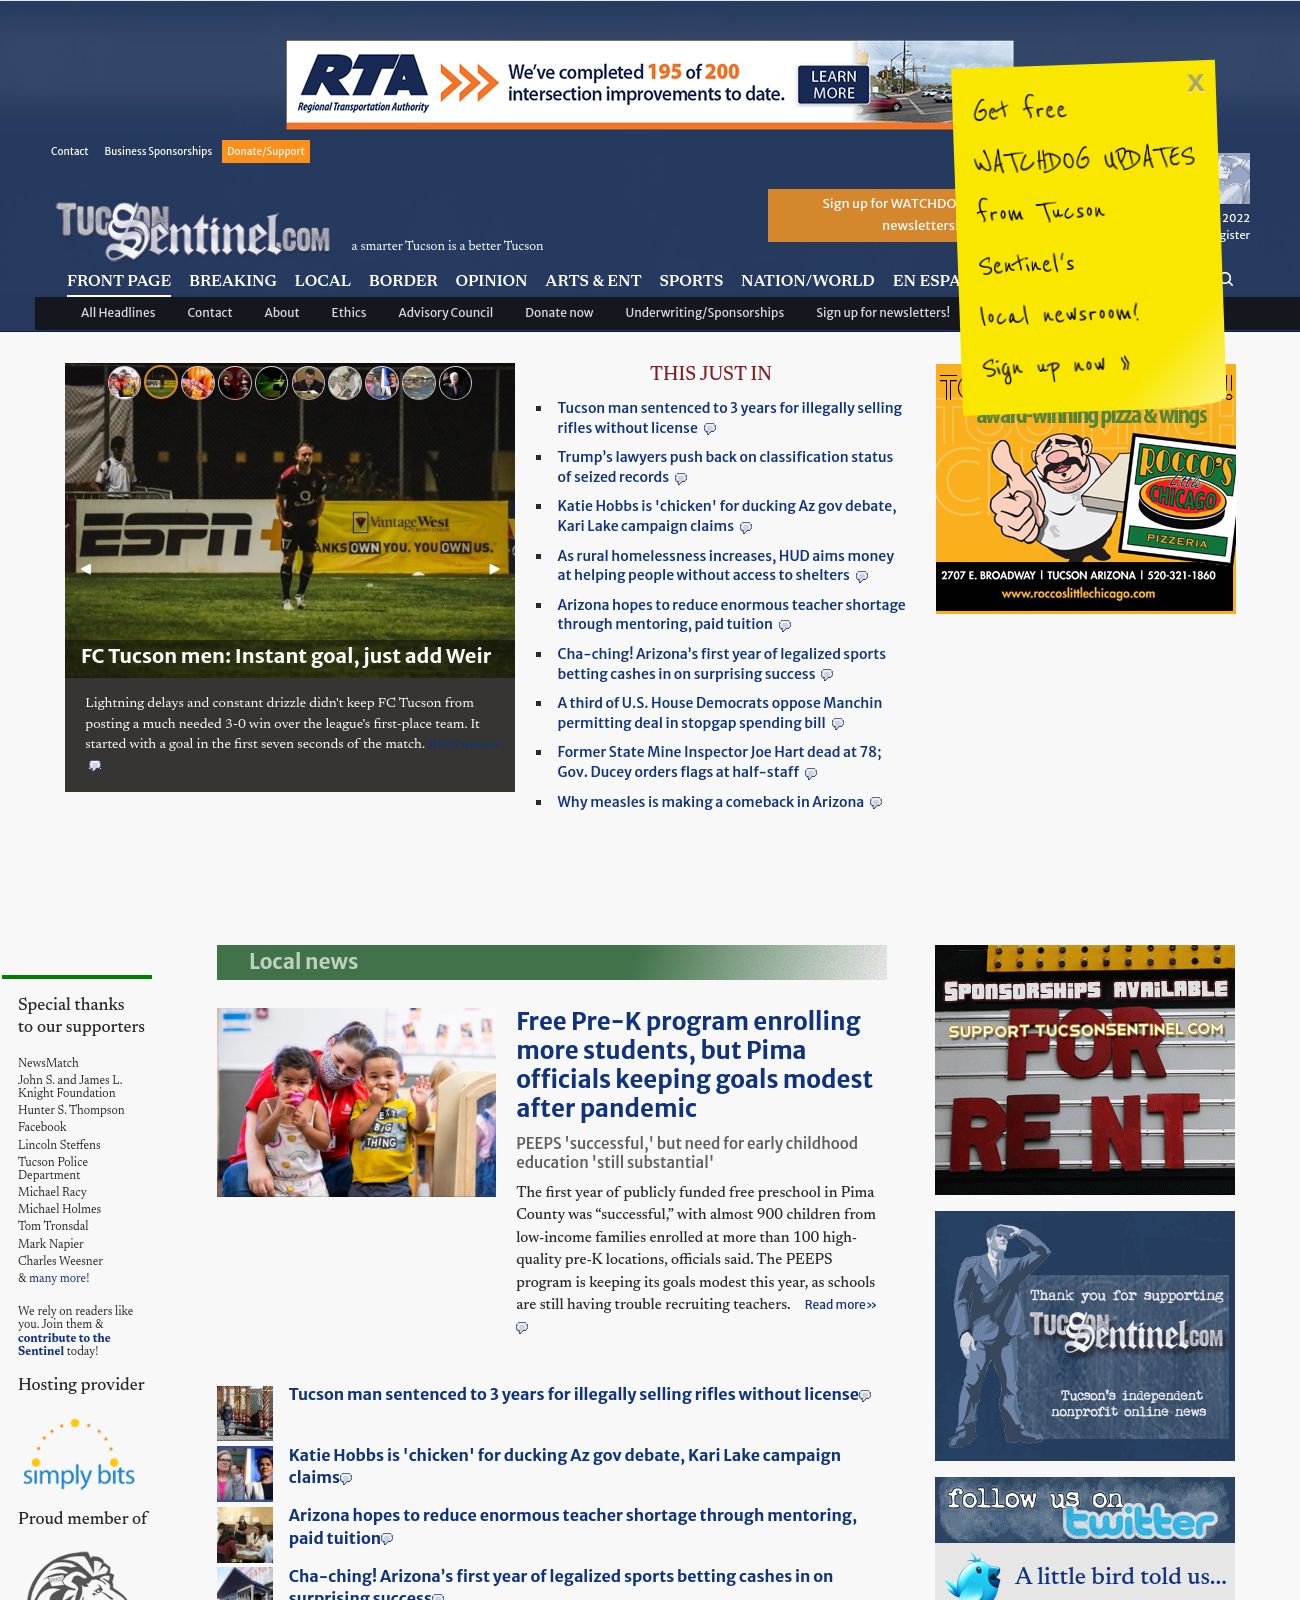 Tucson Sentinel at 2022-09-13 19:27:07-07:00 local time